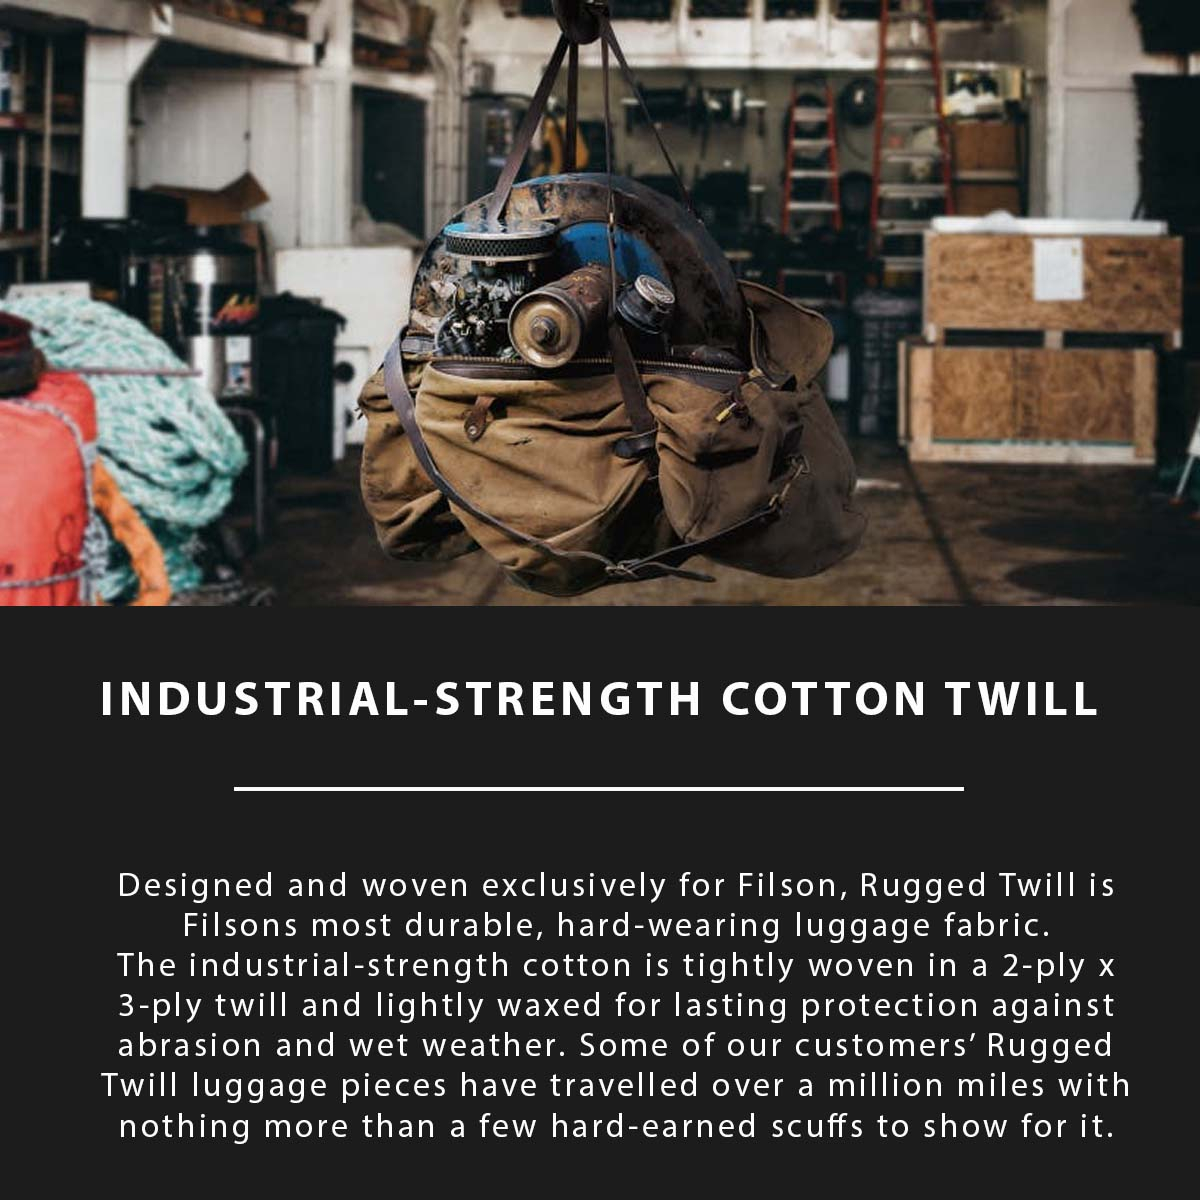 Filson Rugged Twill Travel Kit, Rugged Twill is Filsons most durable, hard-wearing luggage fabric